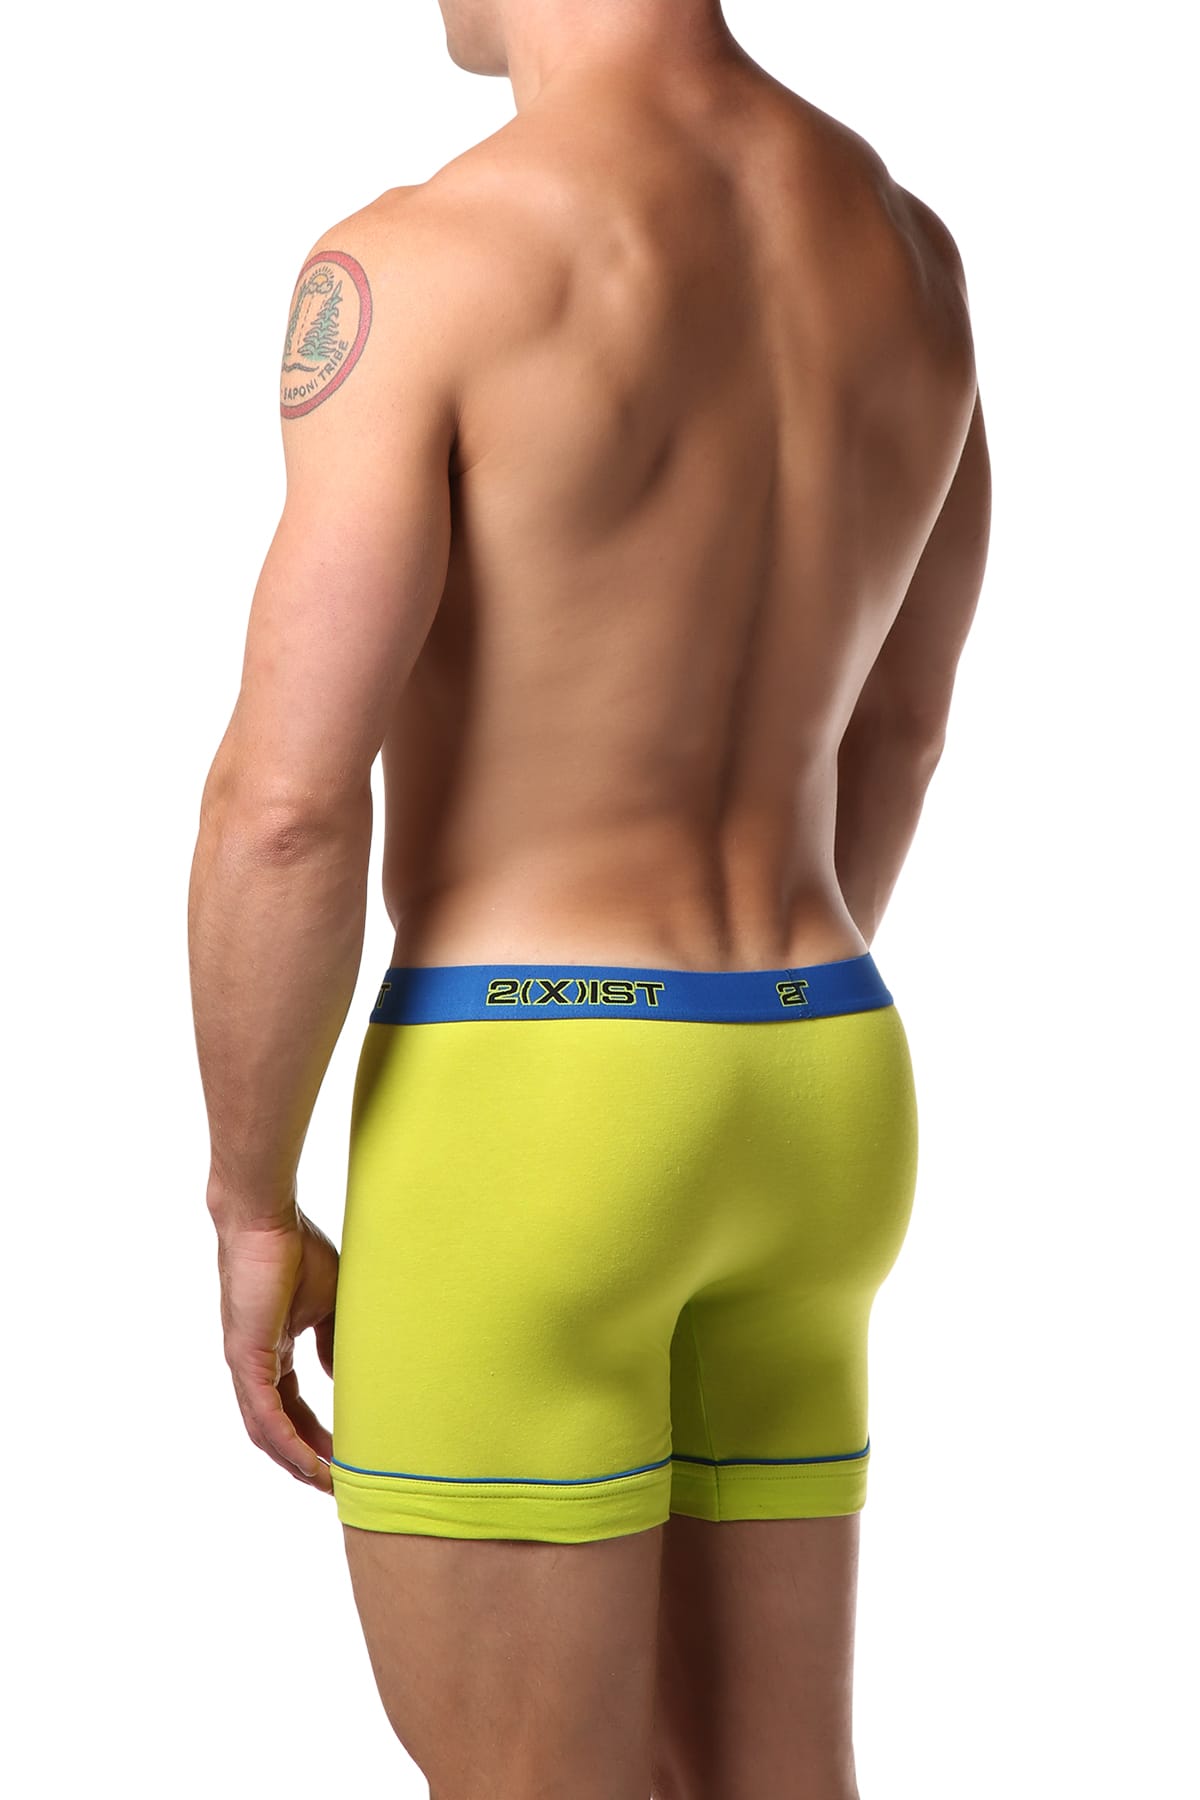 2(X)IST Lime Green & Blue Performance Boxer Brief